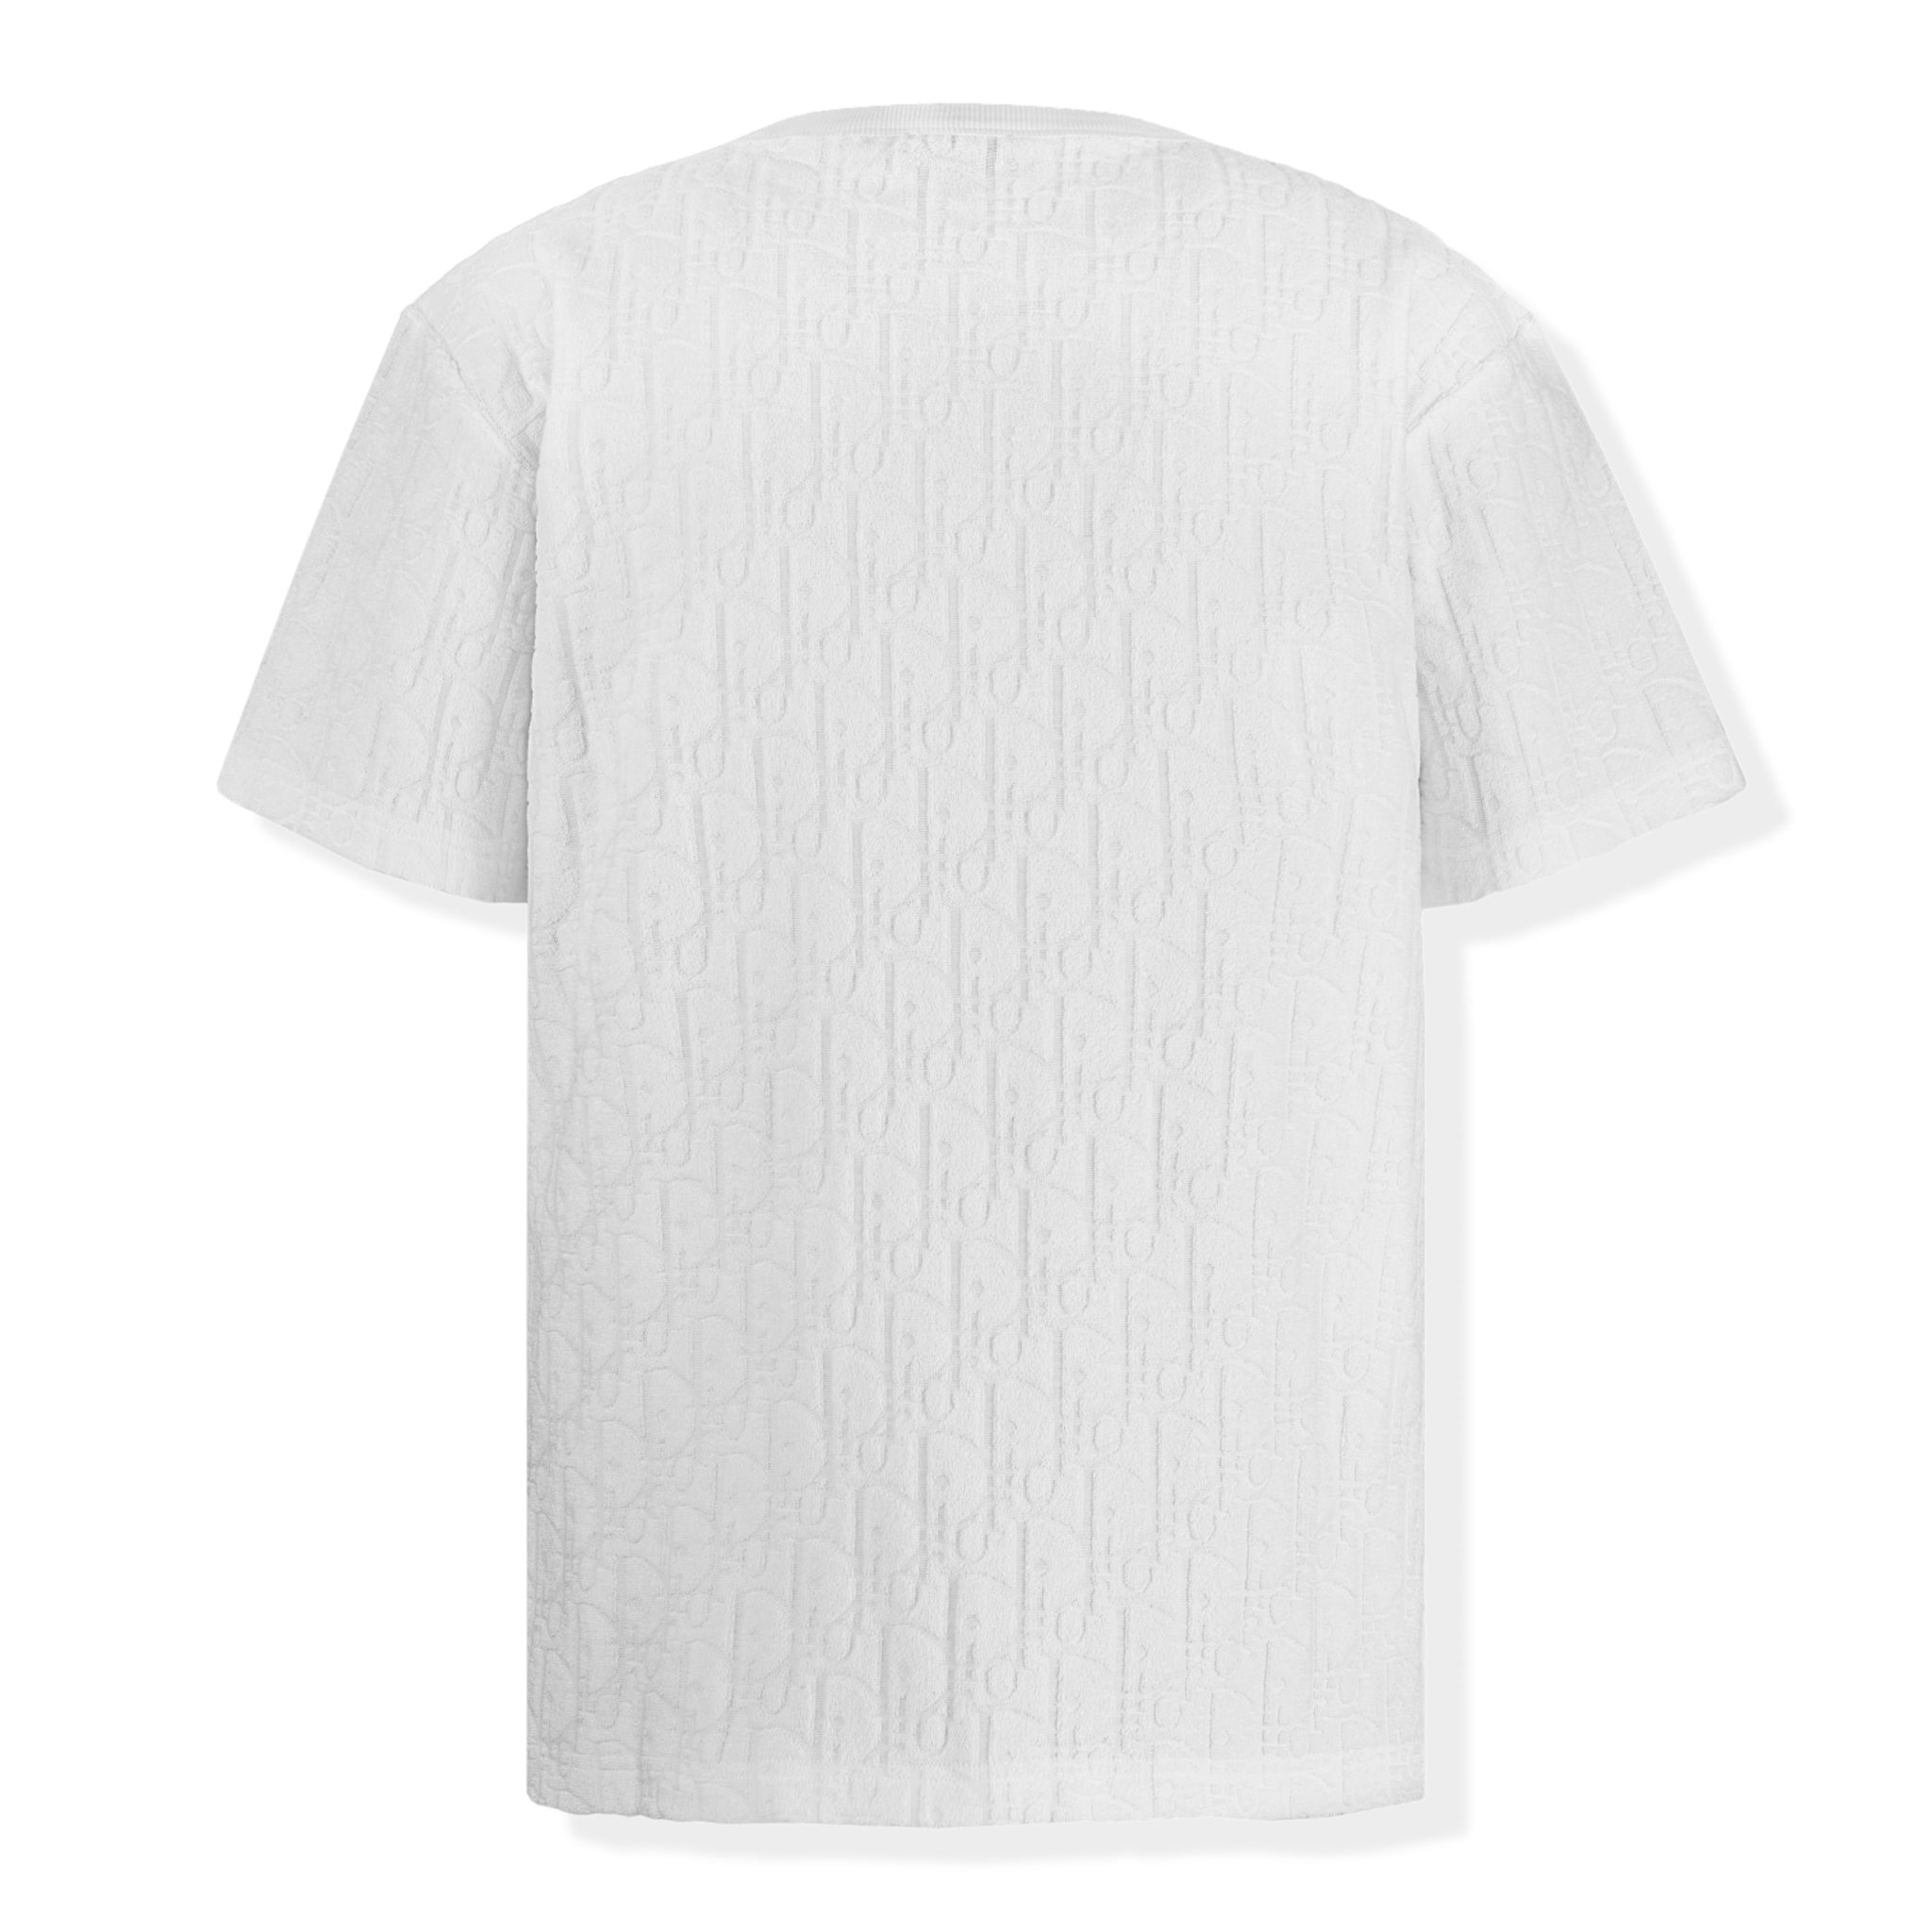 Image of Dior Oblique Towelling White T Shirt